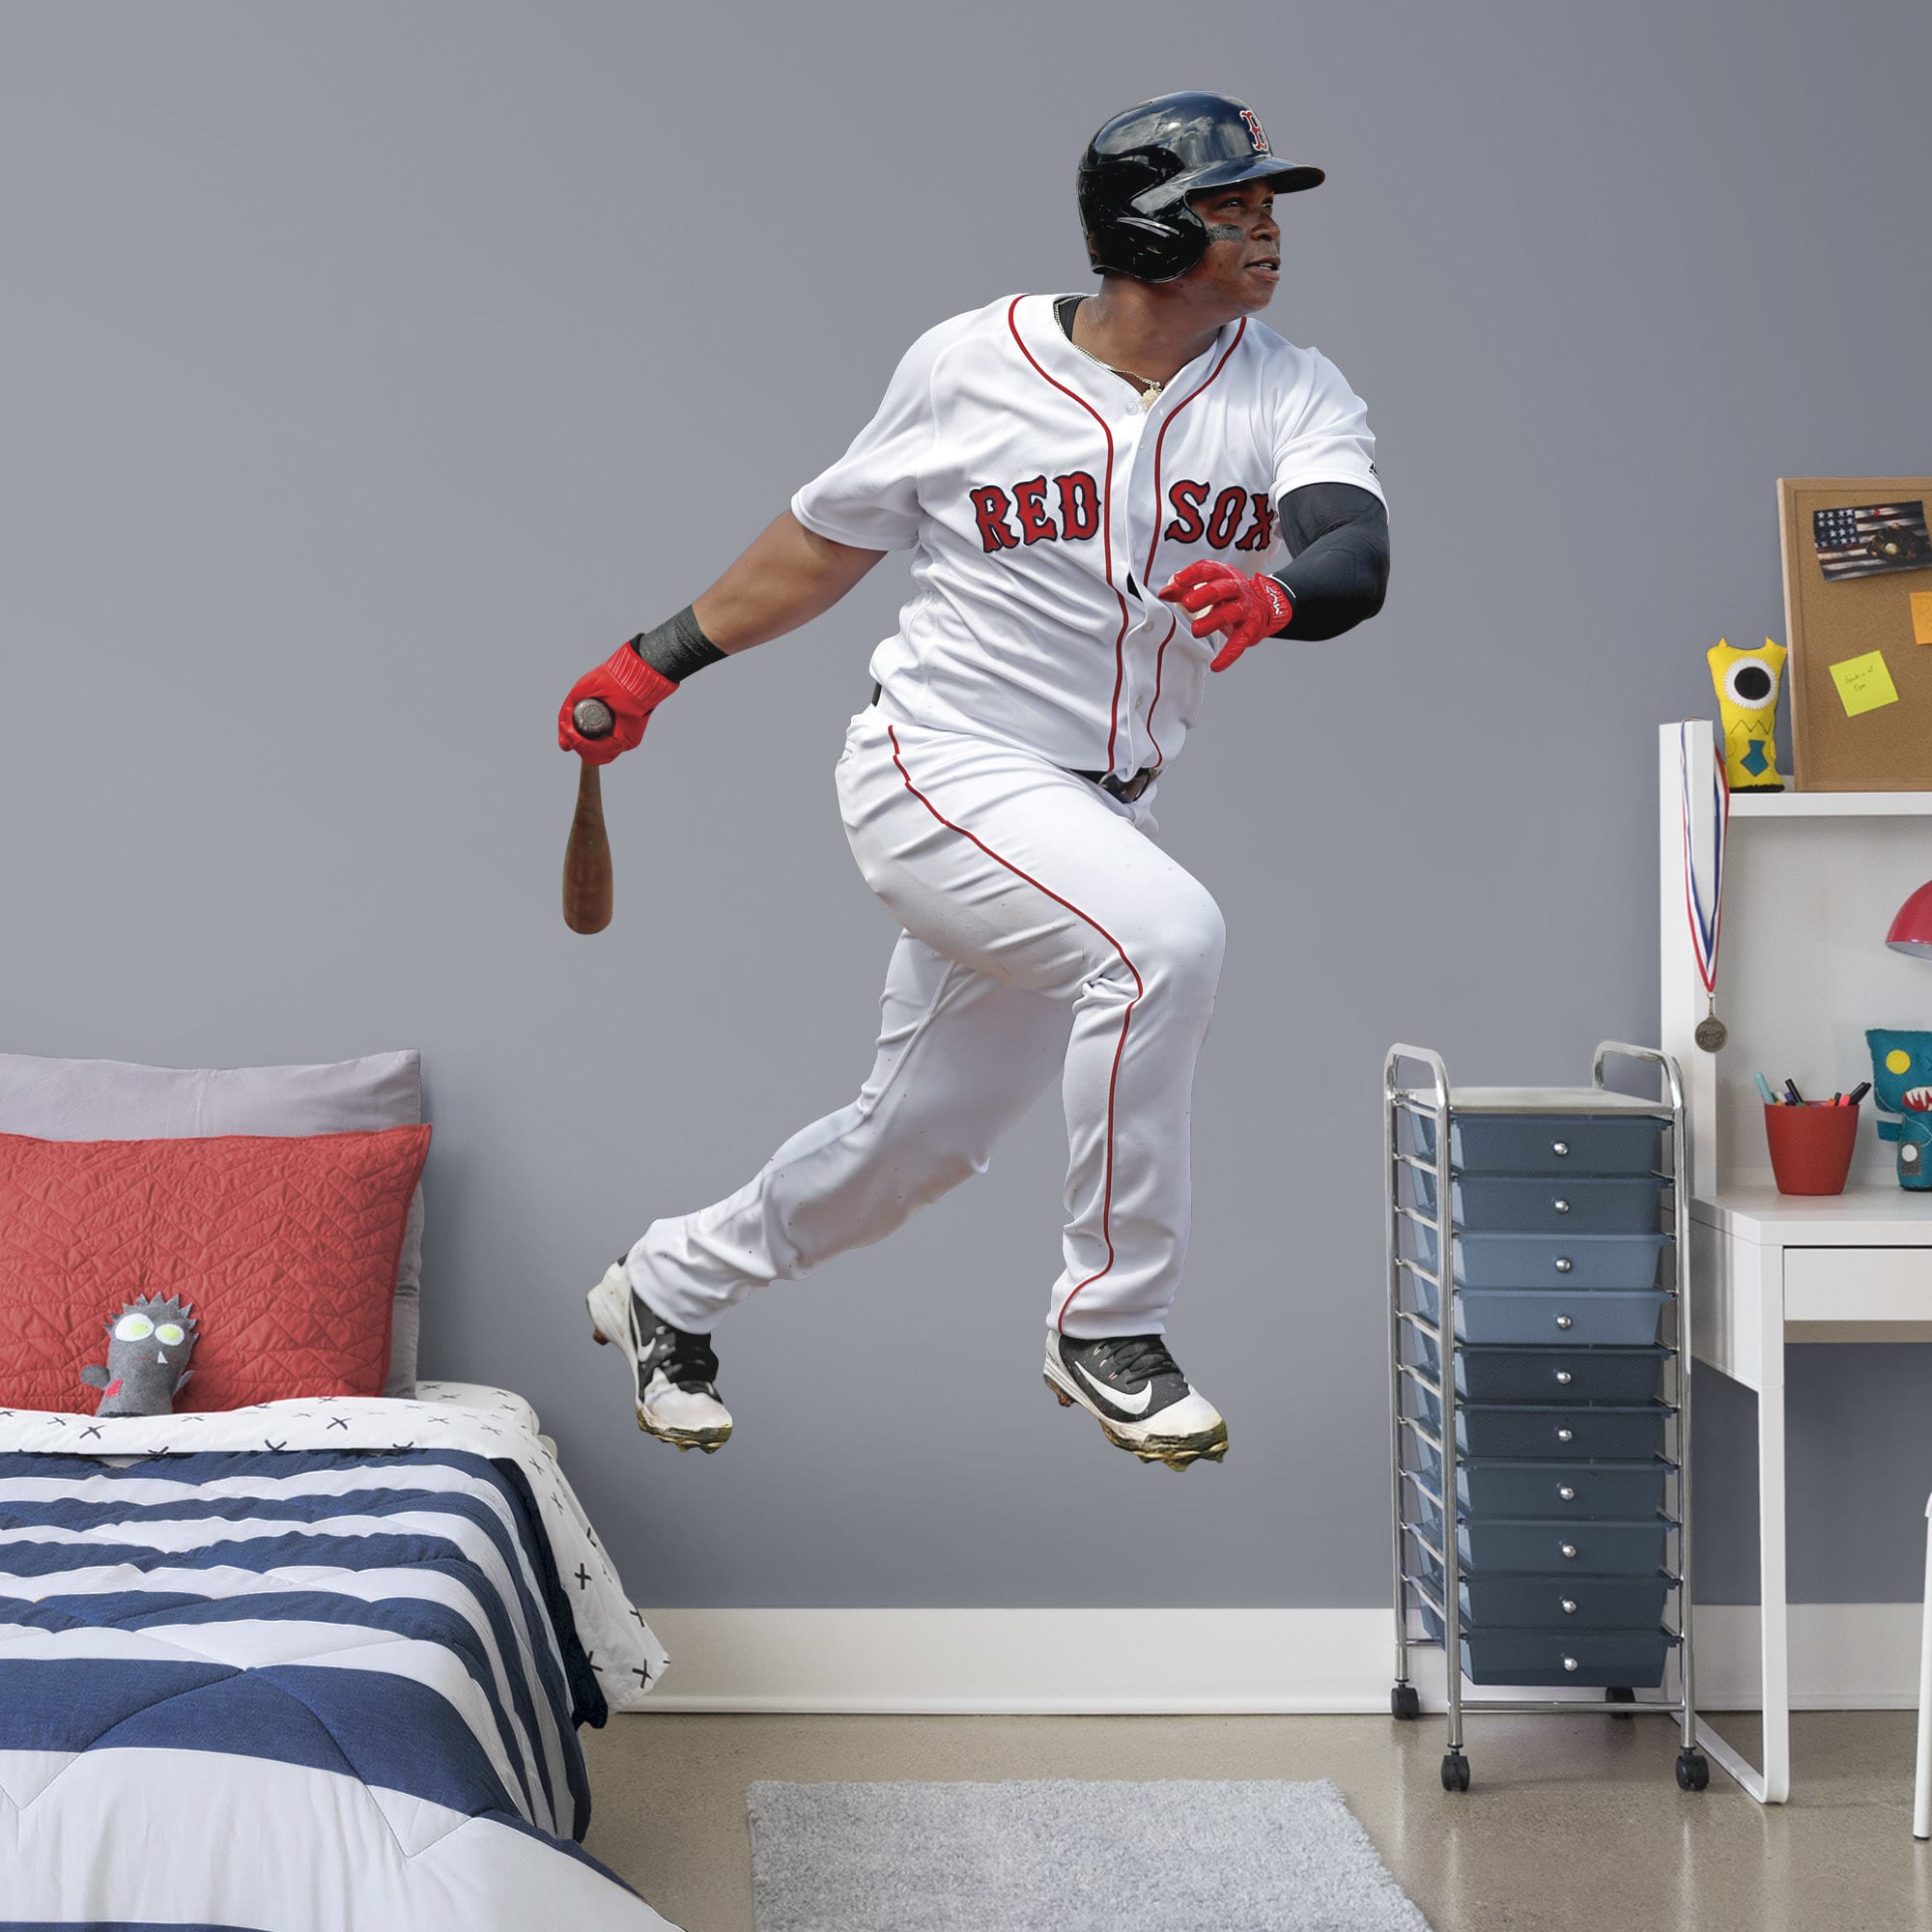 Rafael Devers for Boston Red Sox - Officially Licensed MLB Removable Wall Decal Life-Size Athlete + 2 Decals (62"W x 77"H) by Fa